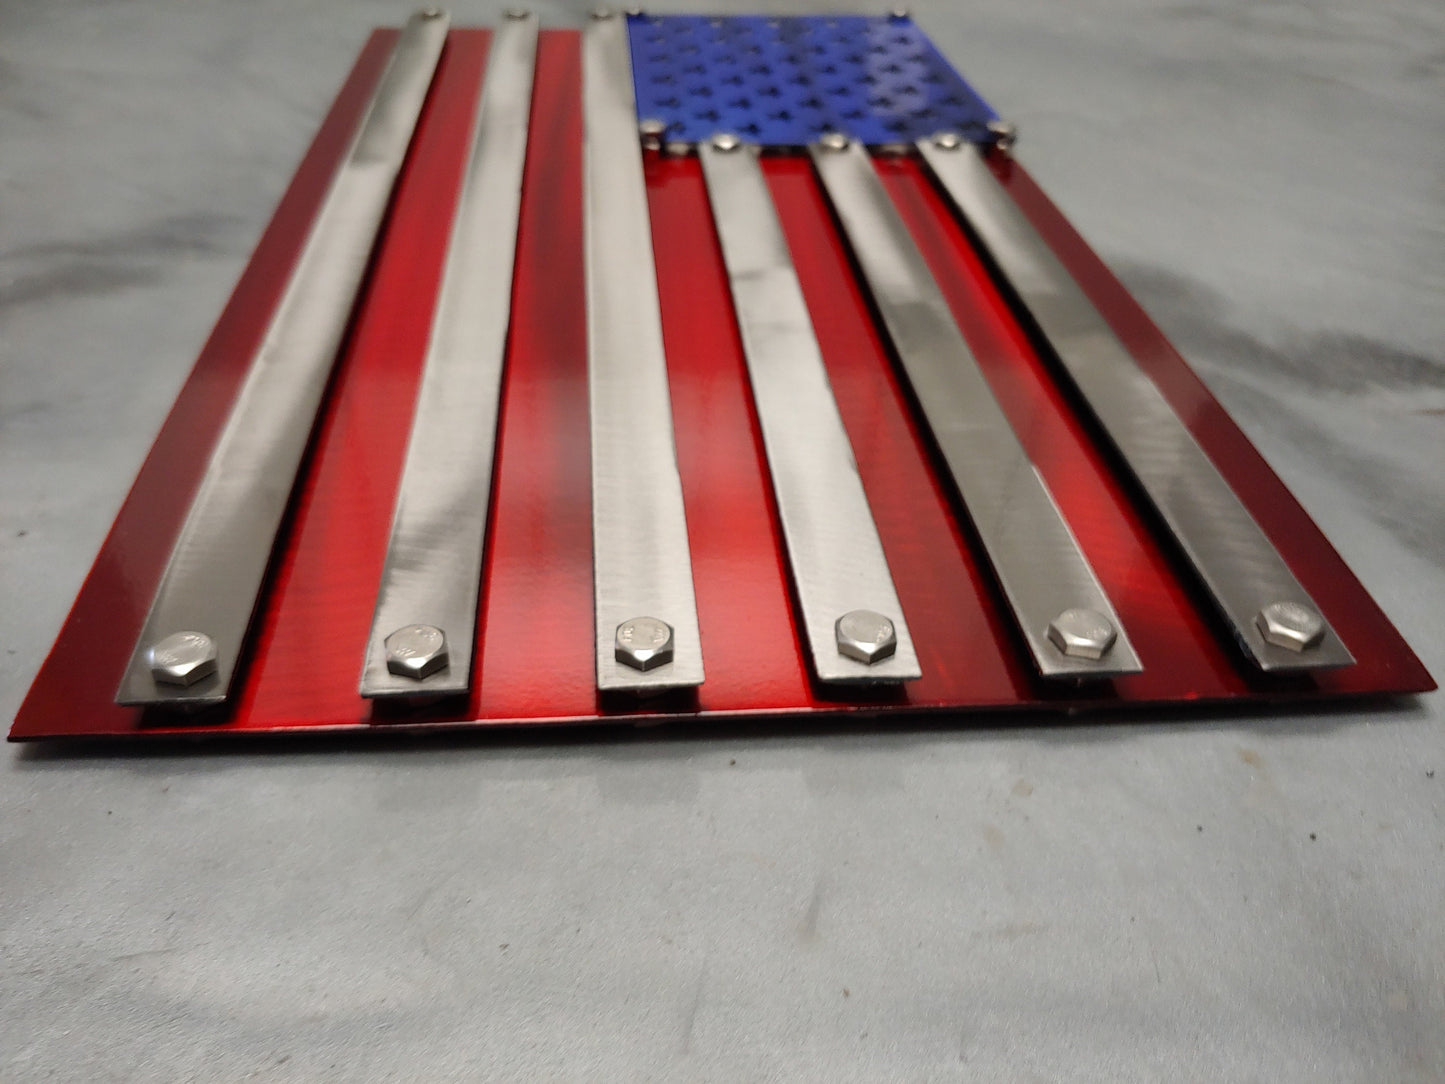 2 layered American flag, handmade and proudly made in the USA